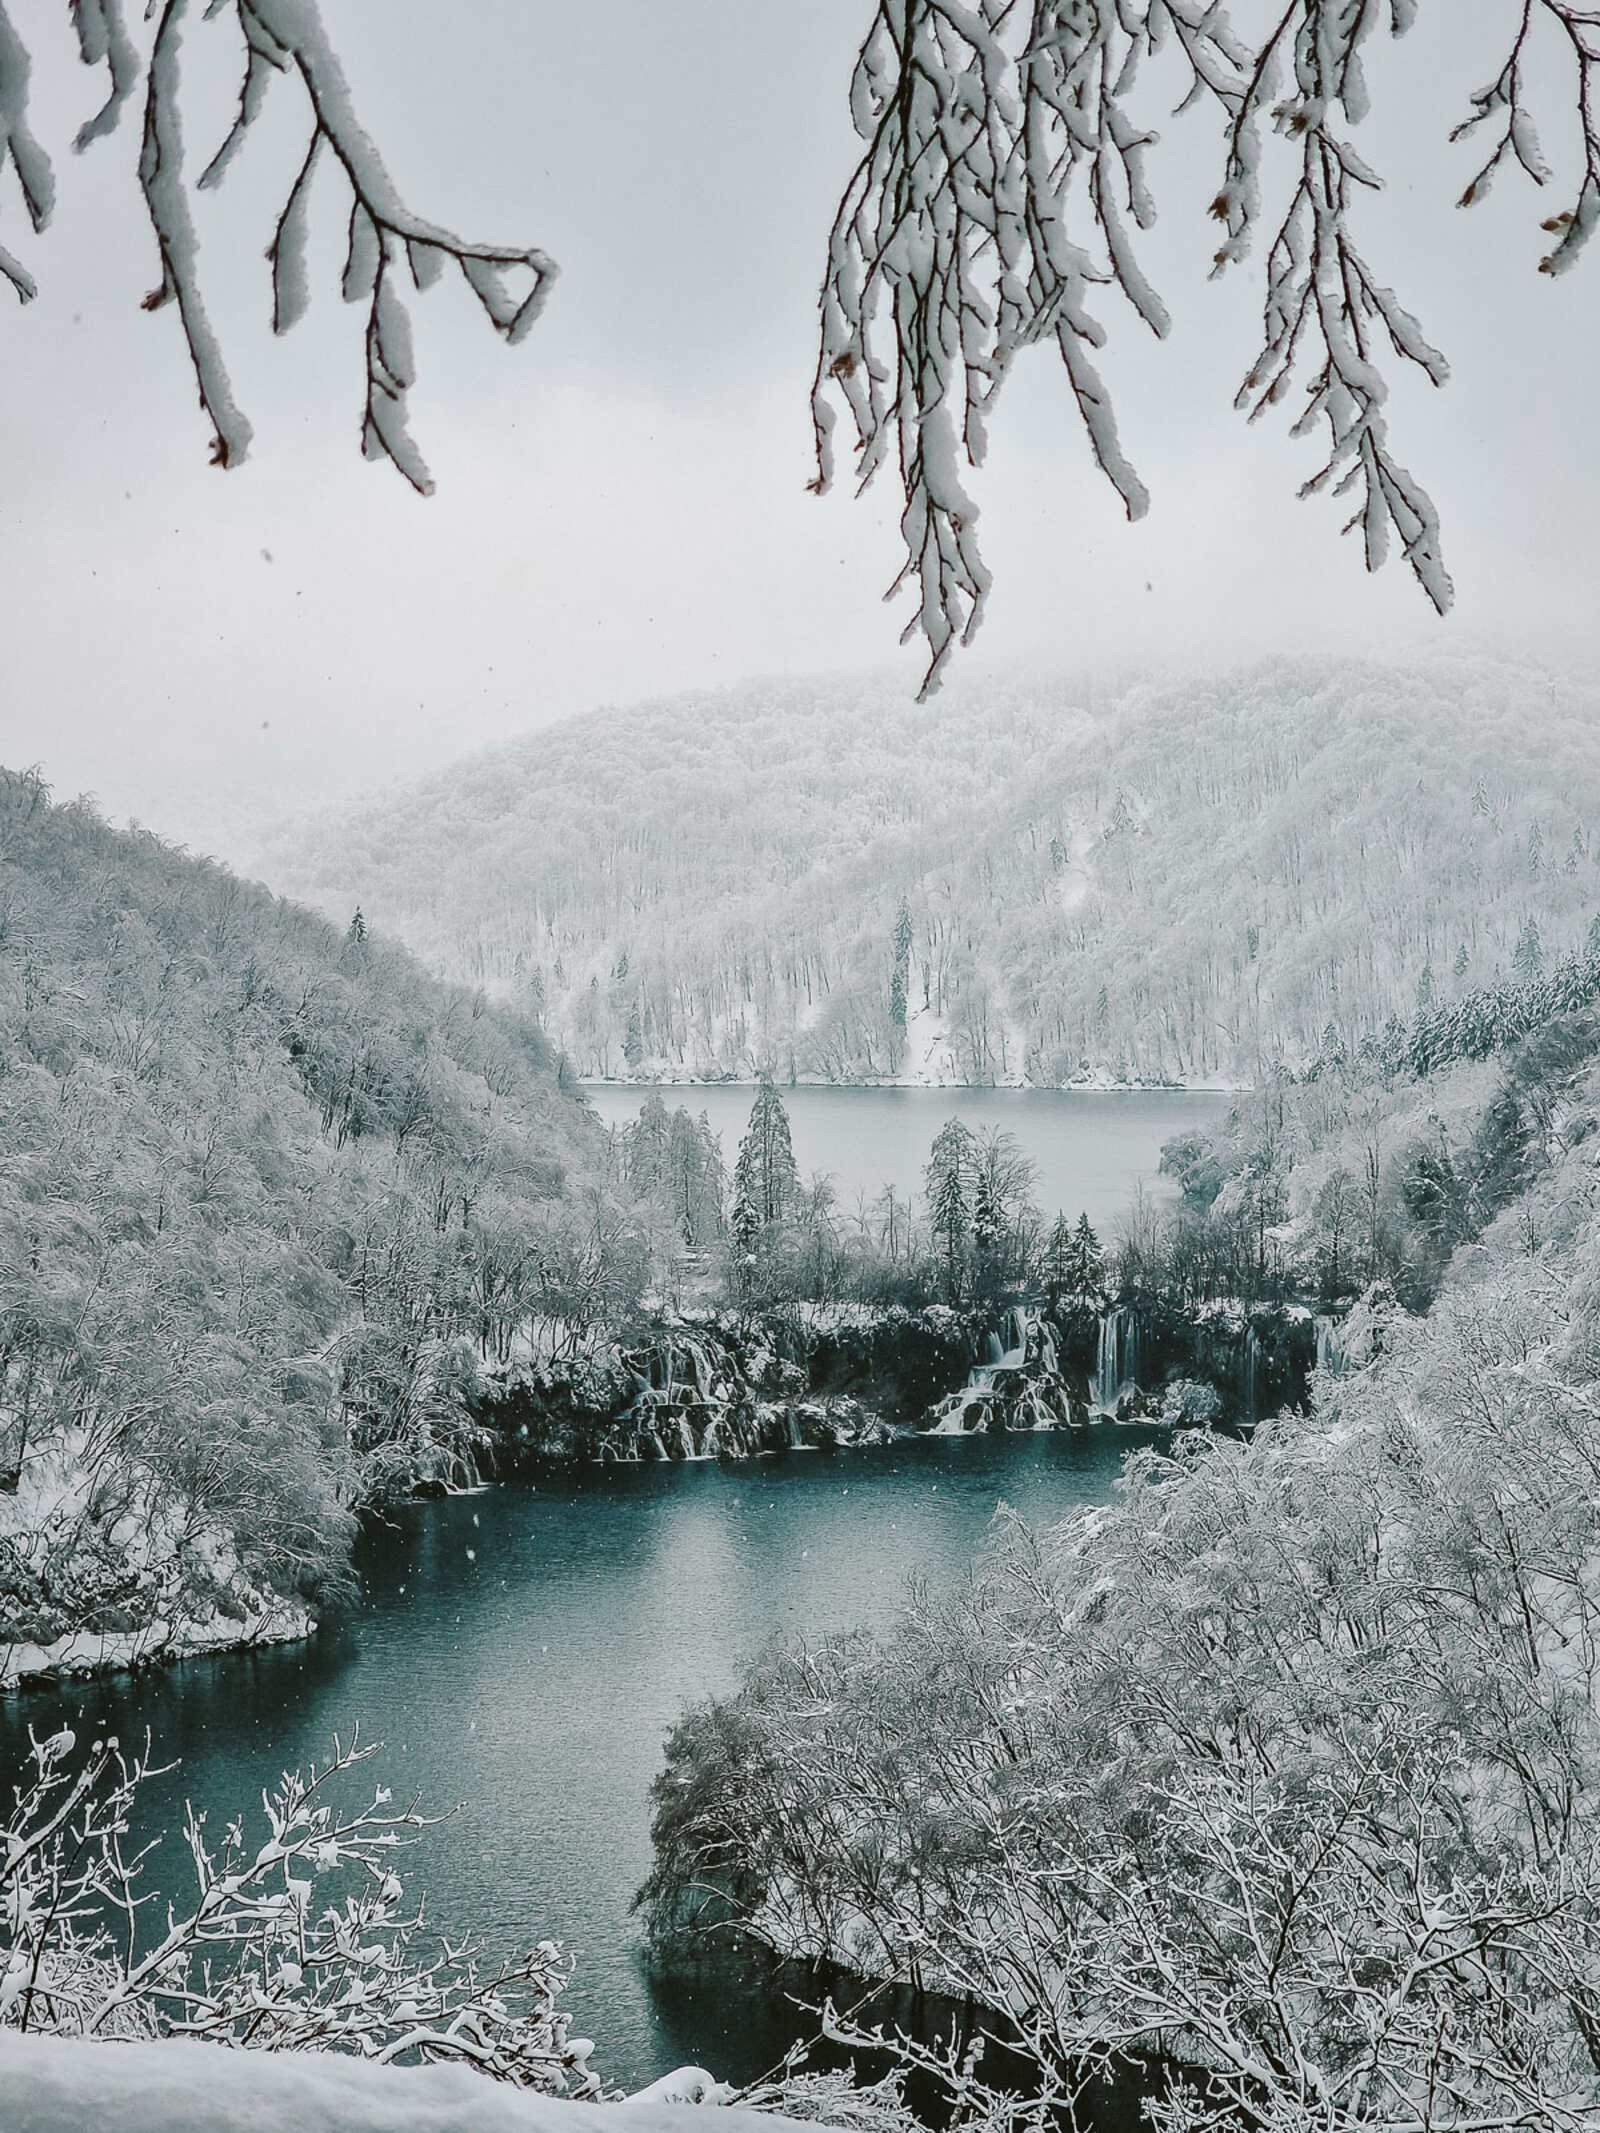 View looking out from a platform with snow covered tree branches hanging down, there is a blue lake with waterfall and hills either side of the canyon covered in snowy trees and low cloud